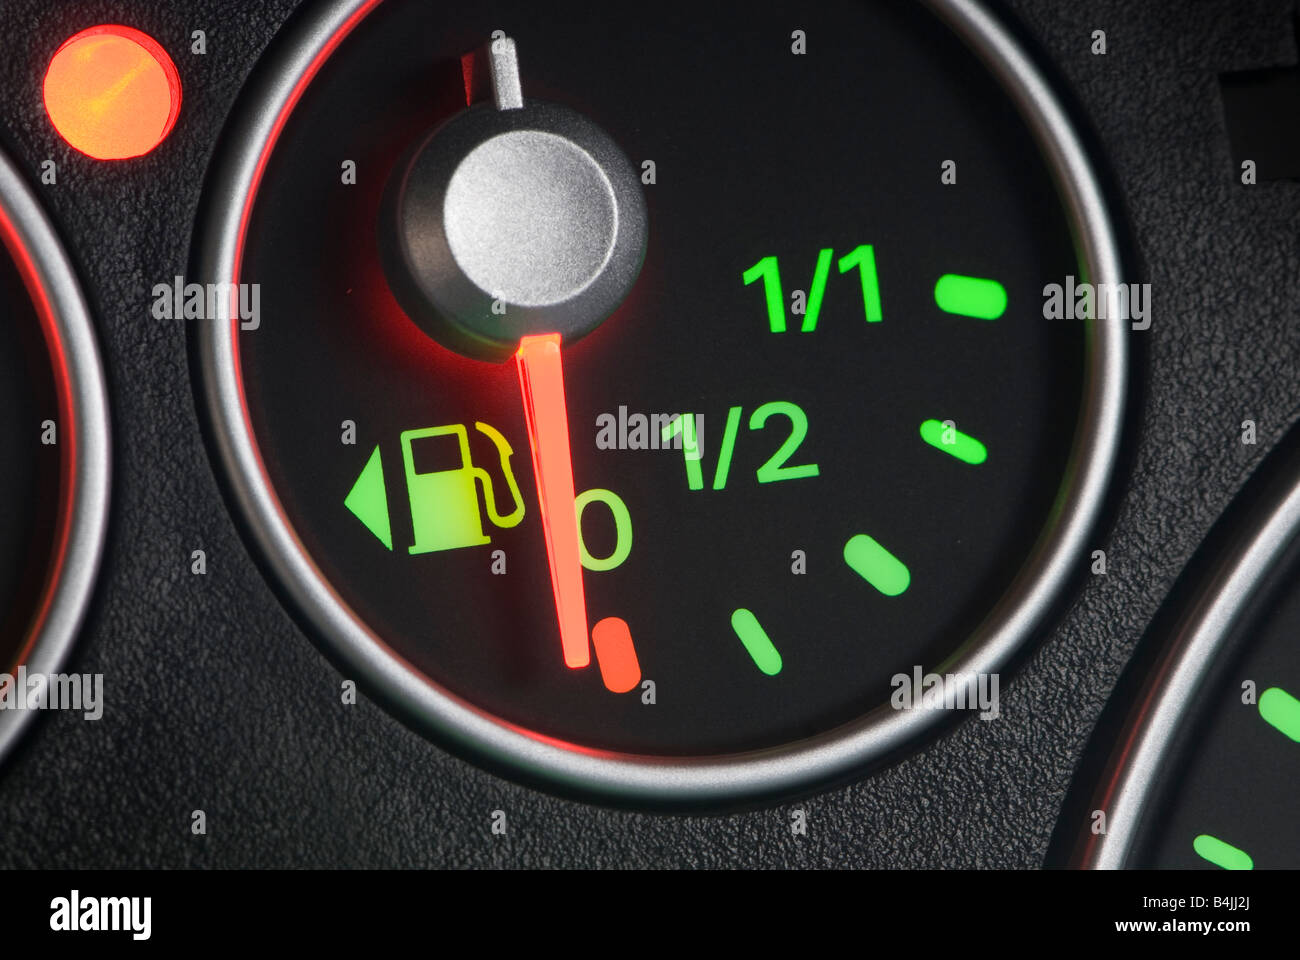 Fuel gage showing empty Stock Photo